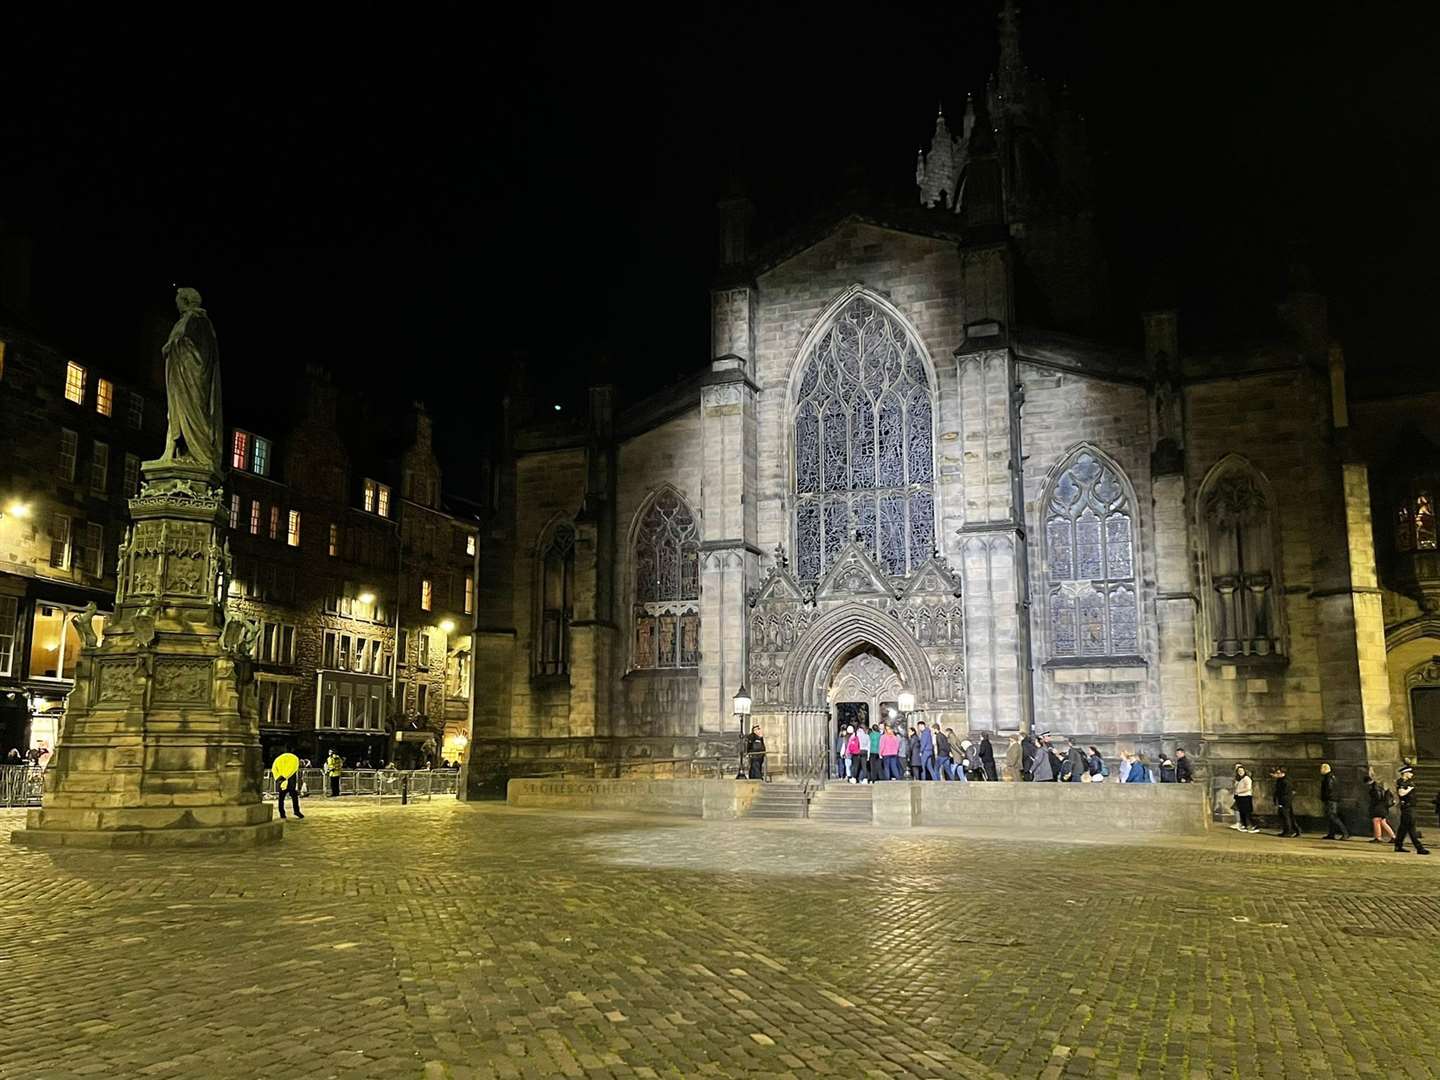 St Giles' Cathedral where Her Majesty was laying in rest.